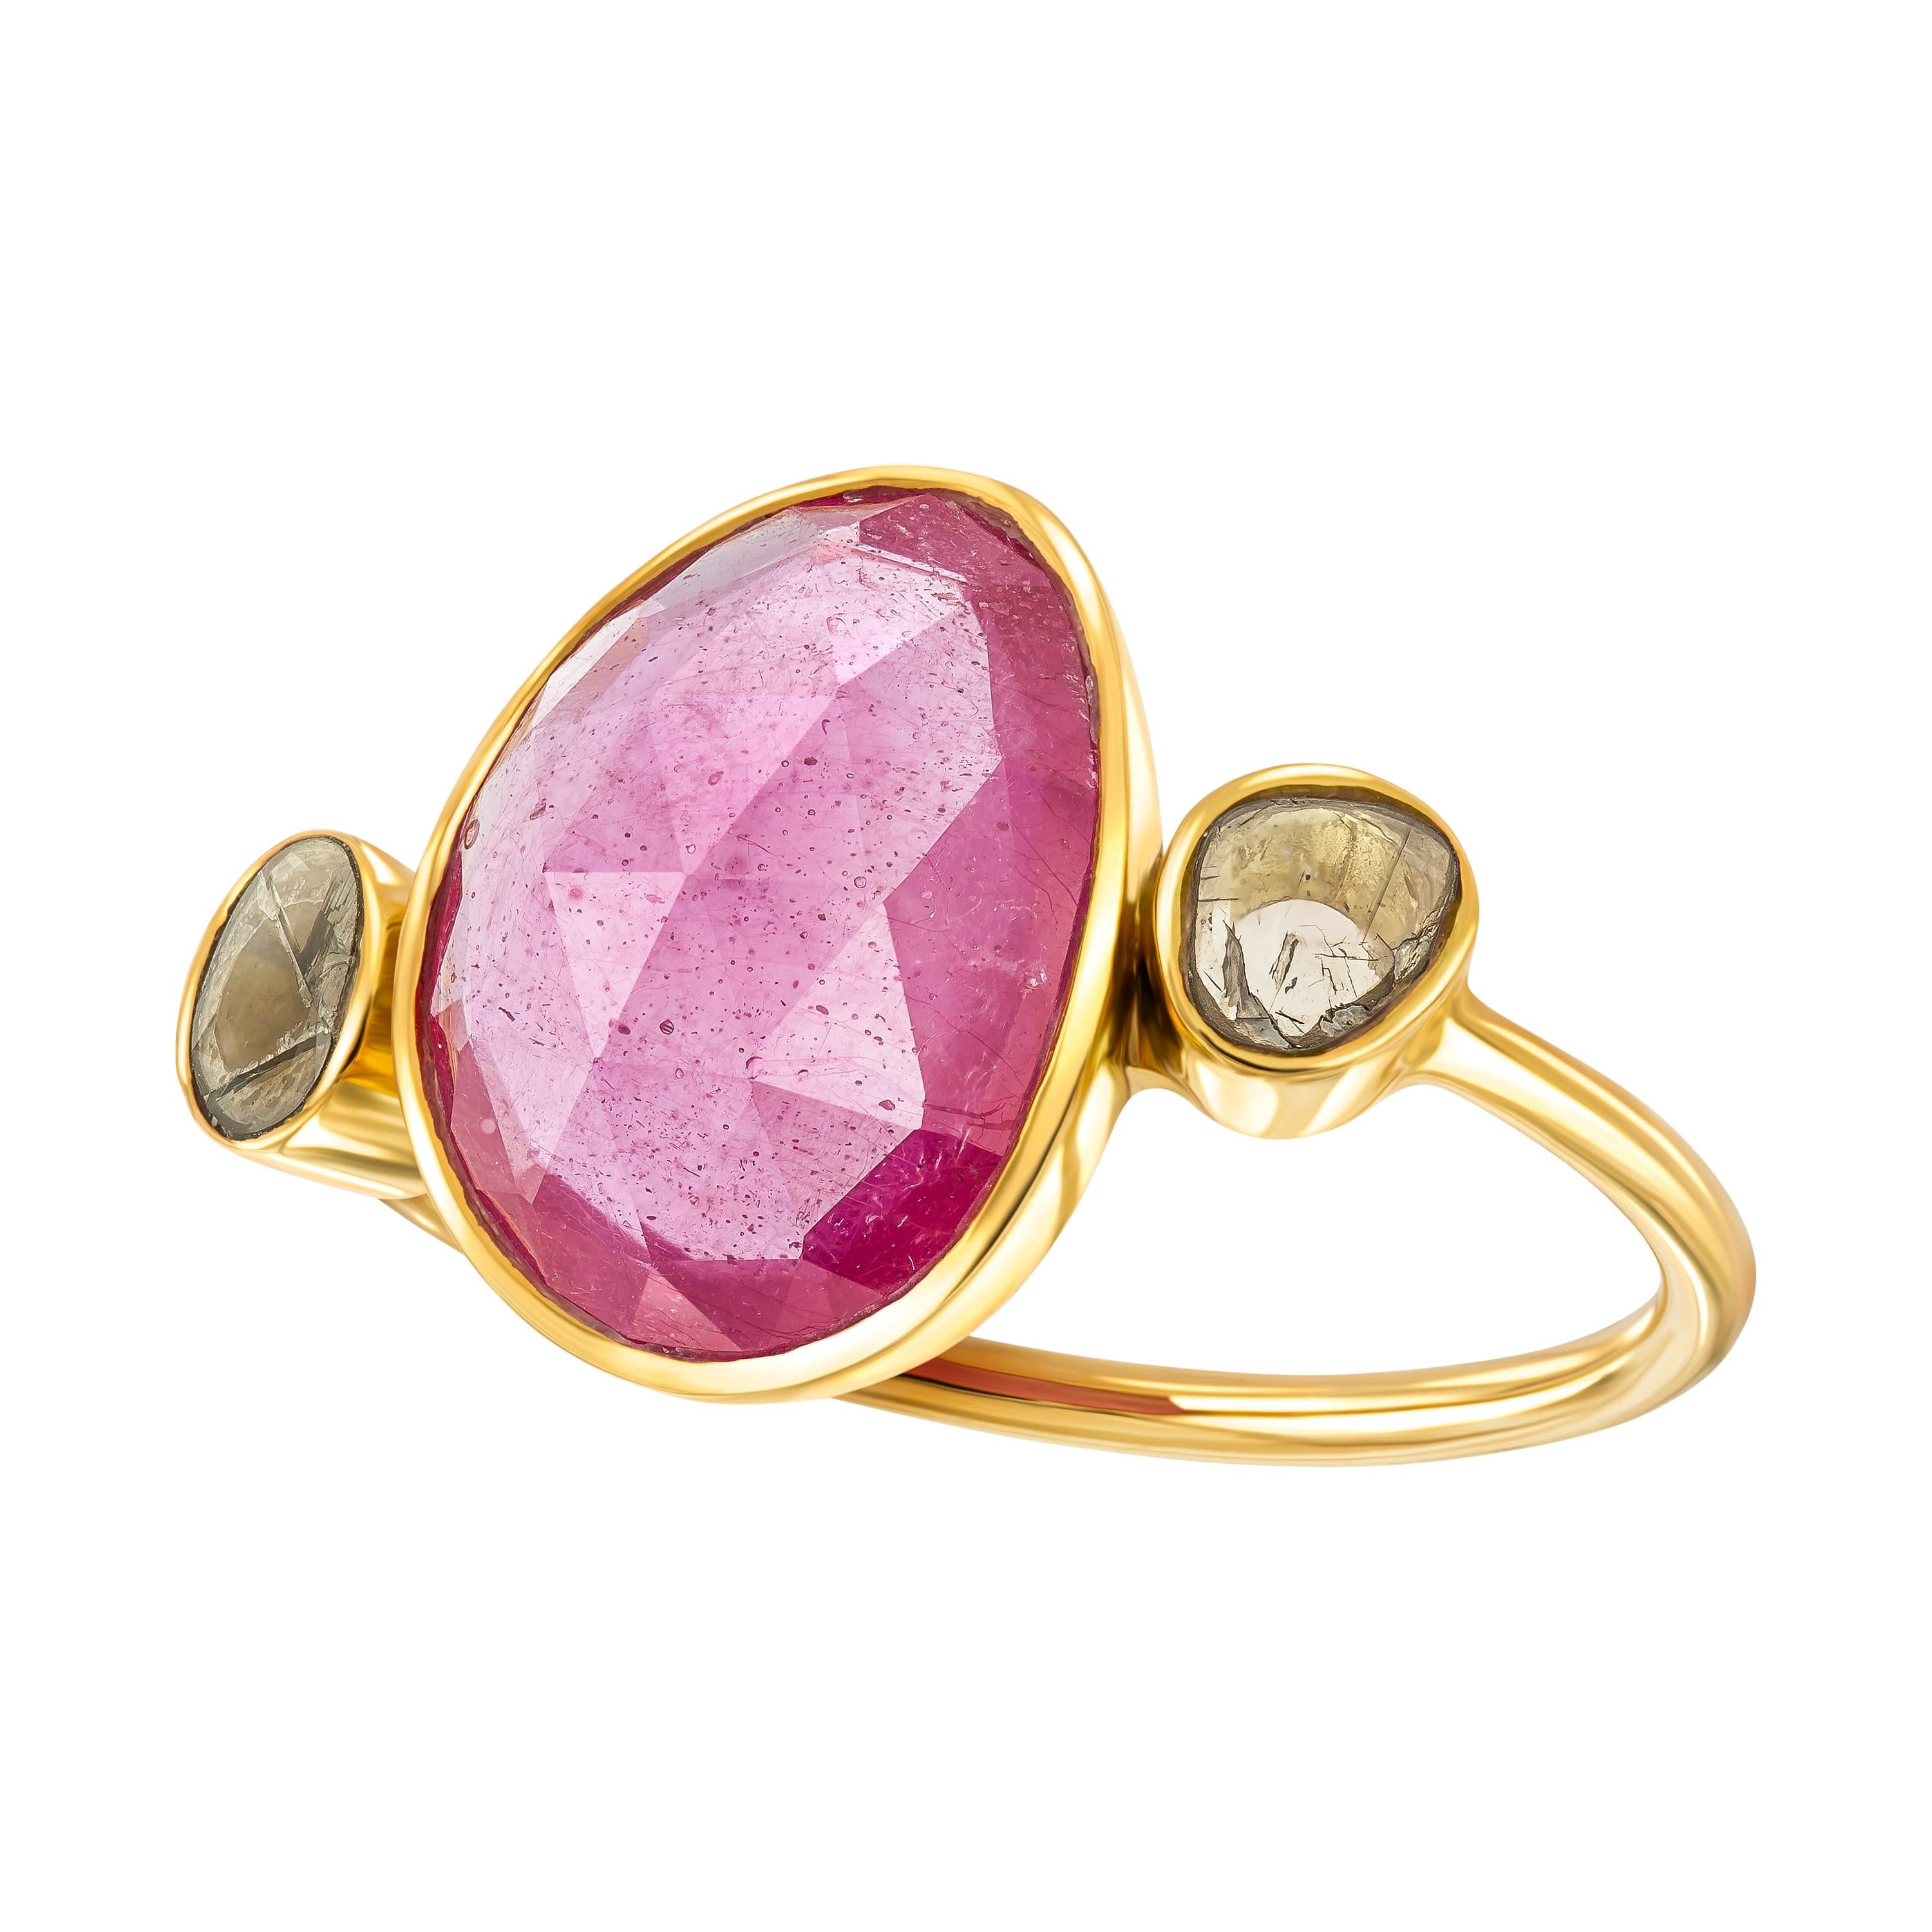 5.75 CT Rose Cut Ruby Diamond  18 KT Yellow Gold Artisan Collection Ring 